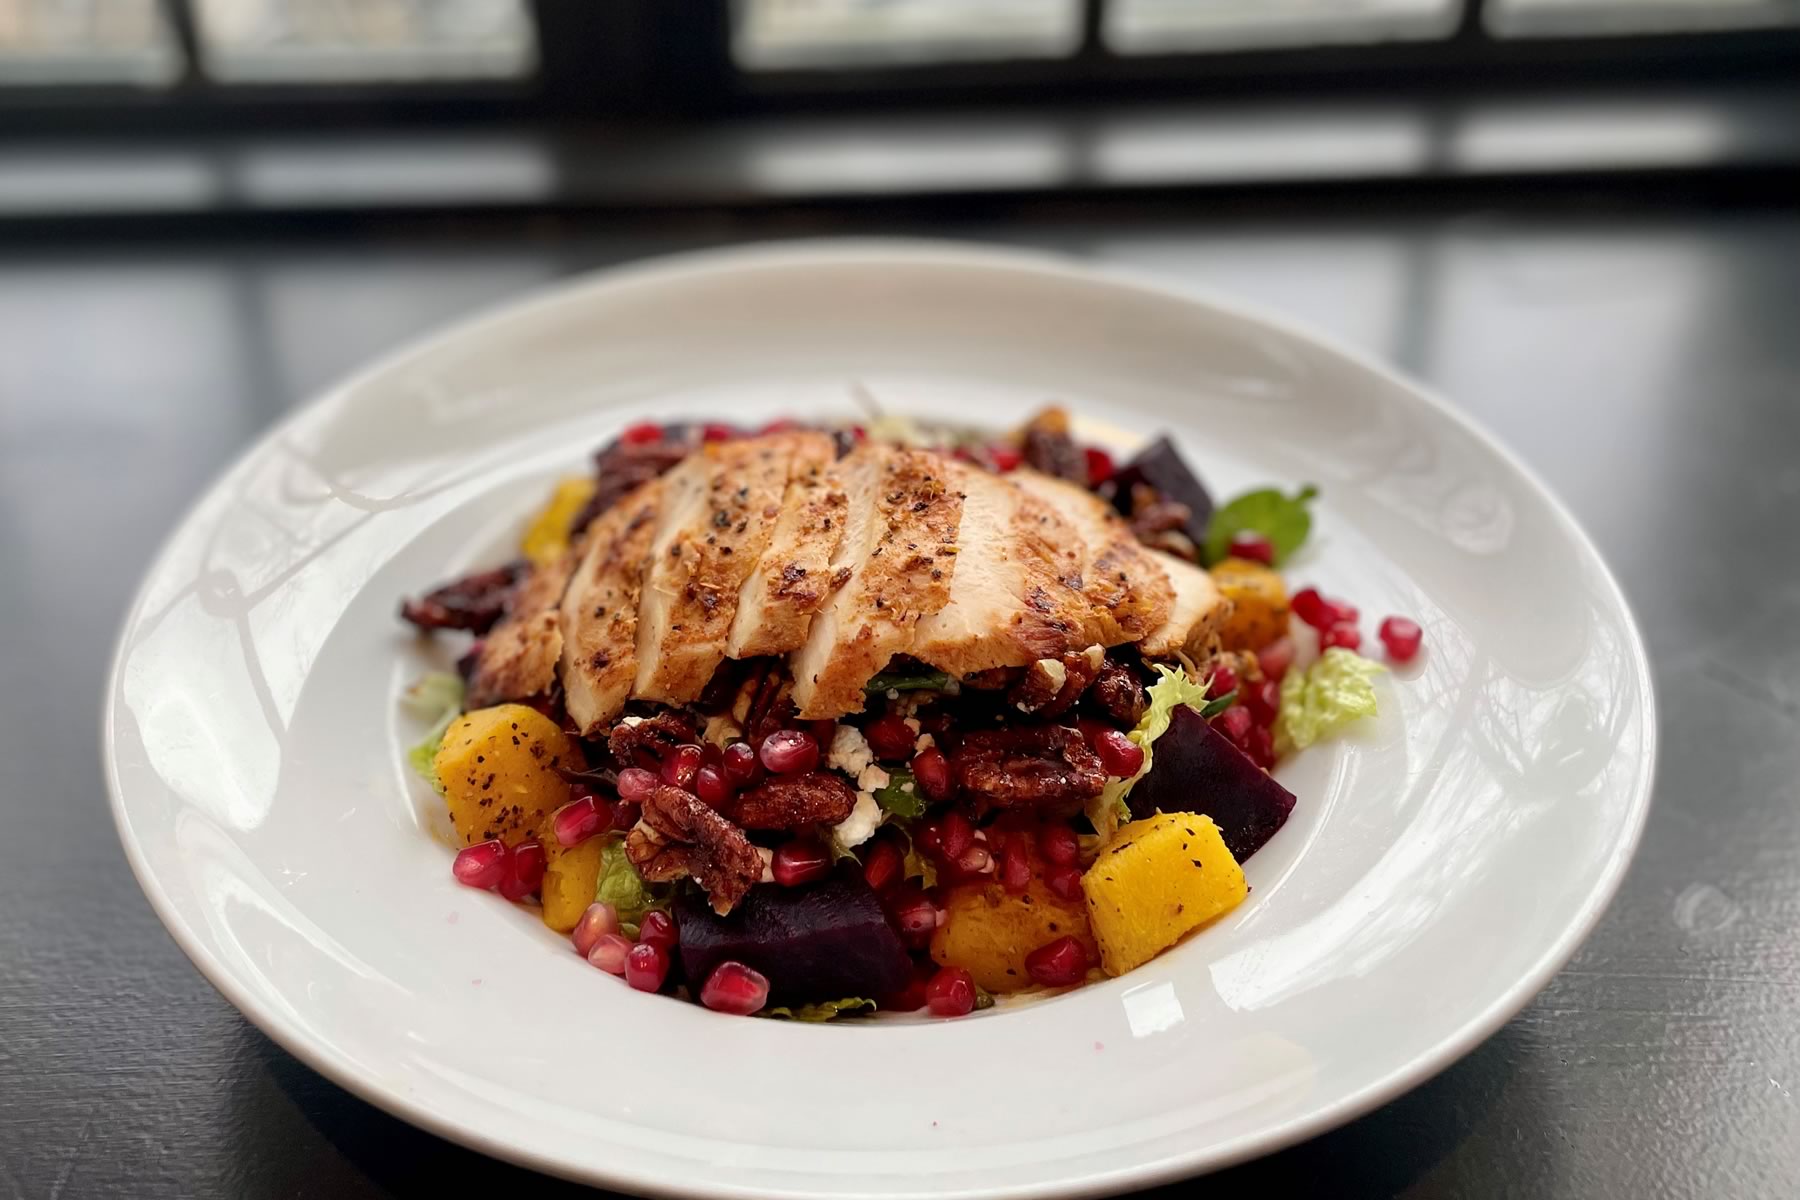 Winter Salad with mixed greens, grilled chicken, roasted squash, beets, pomegranate seeds, spiced candied pecans, crumbled goat’s cheese and a balsamic vinaigrette